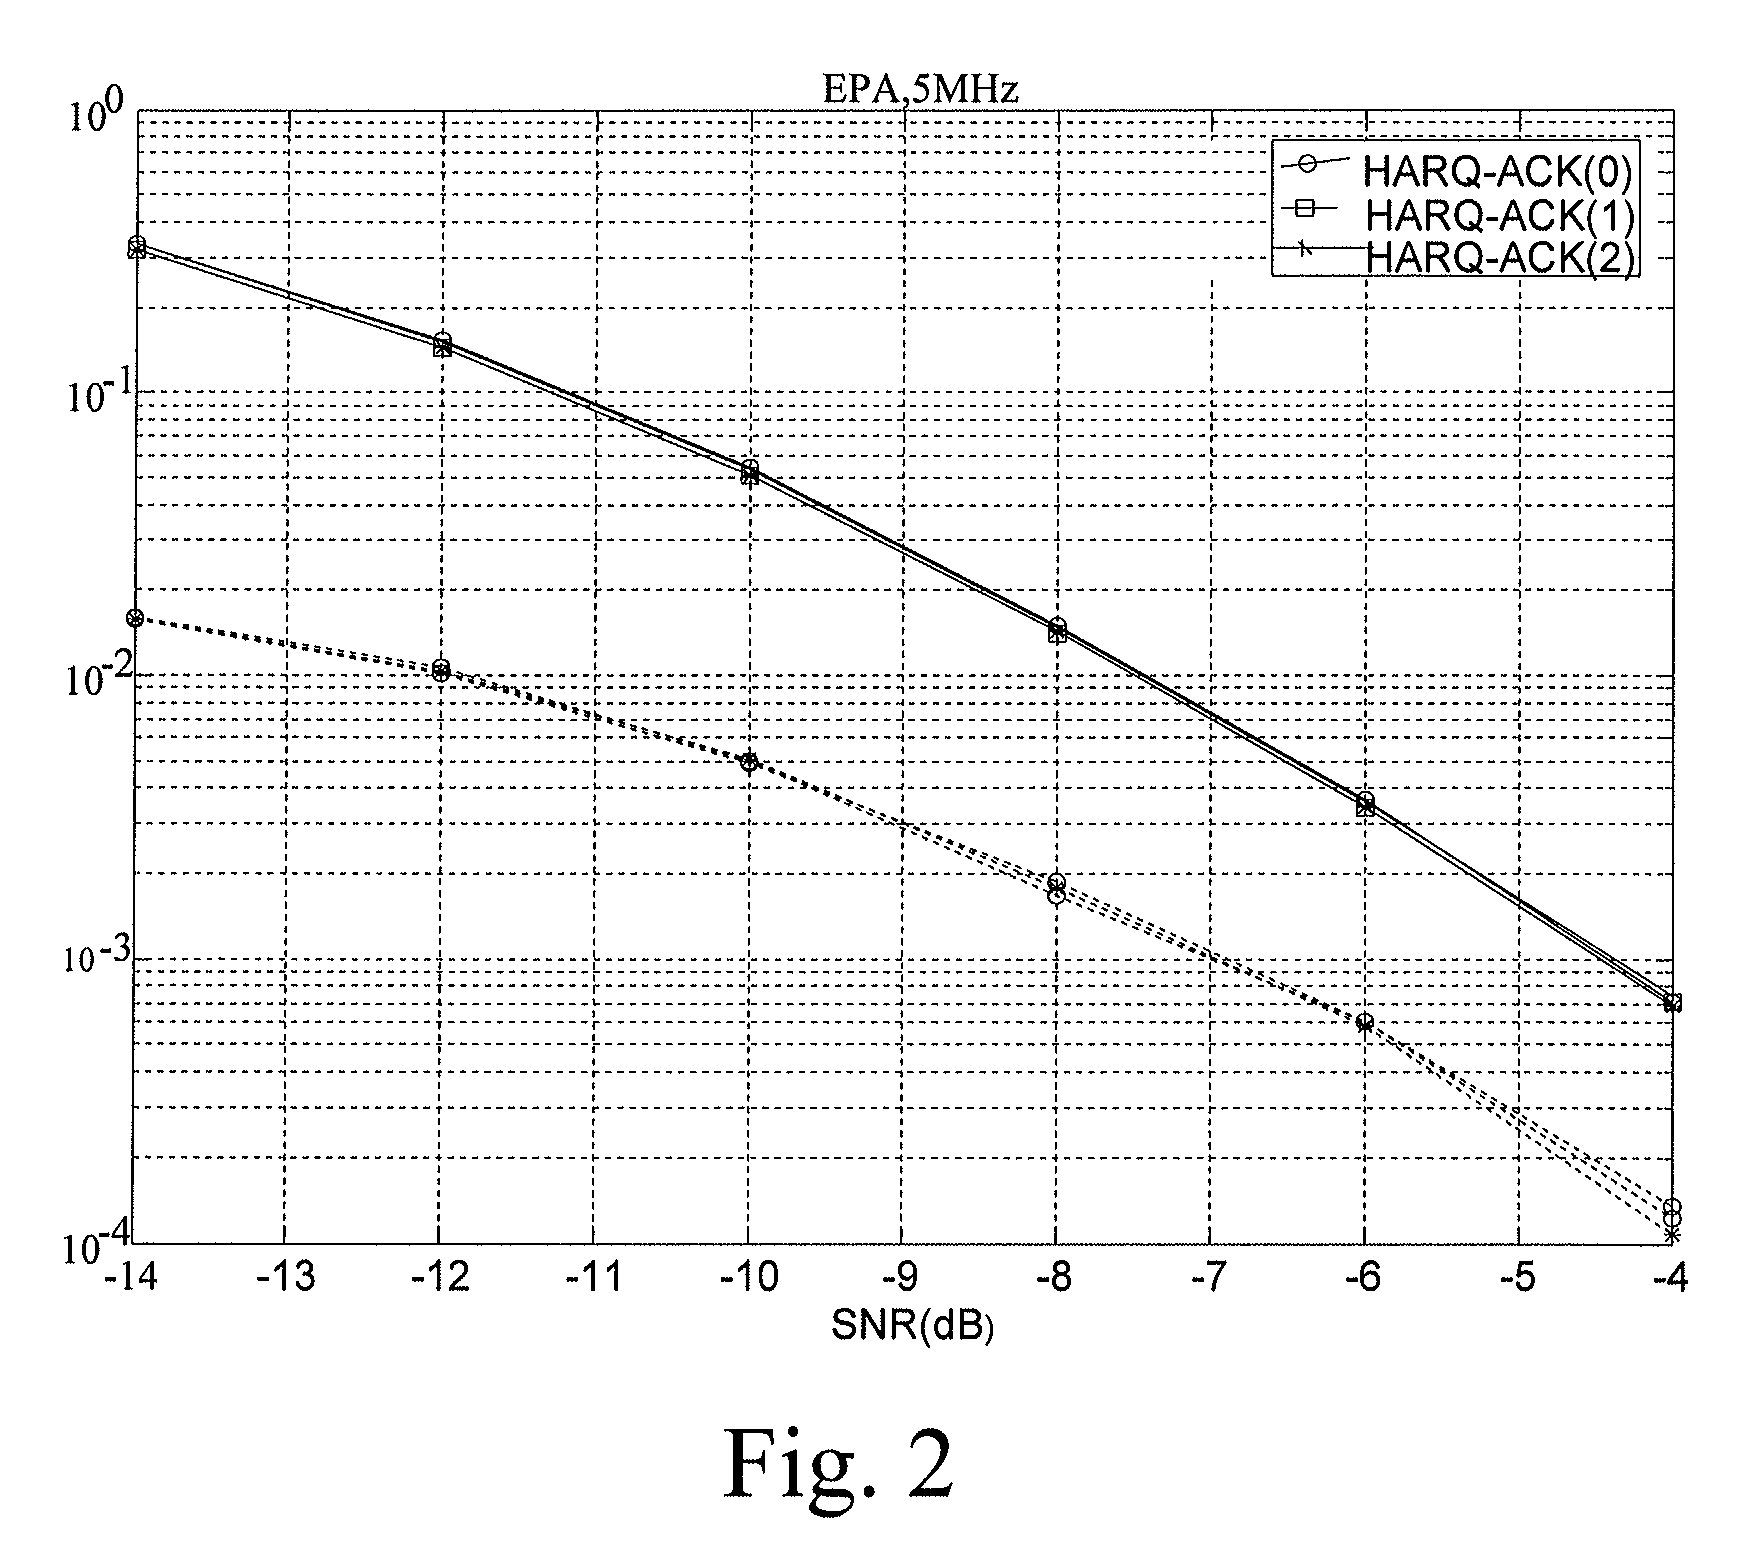 Feedback information relating to a mobile communications system using carrier aggregation